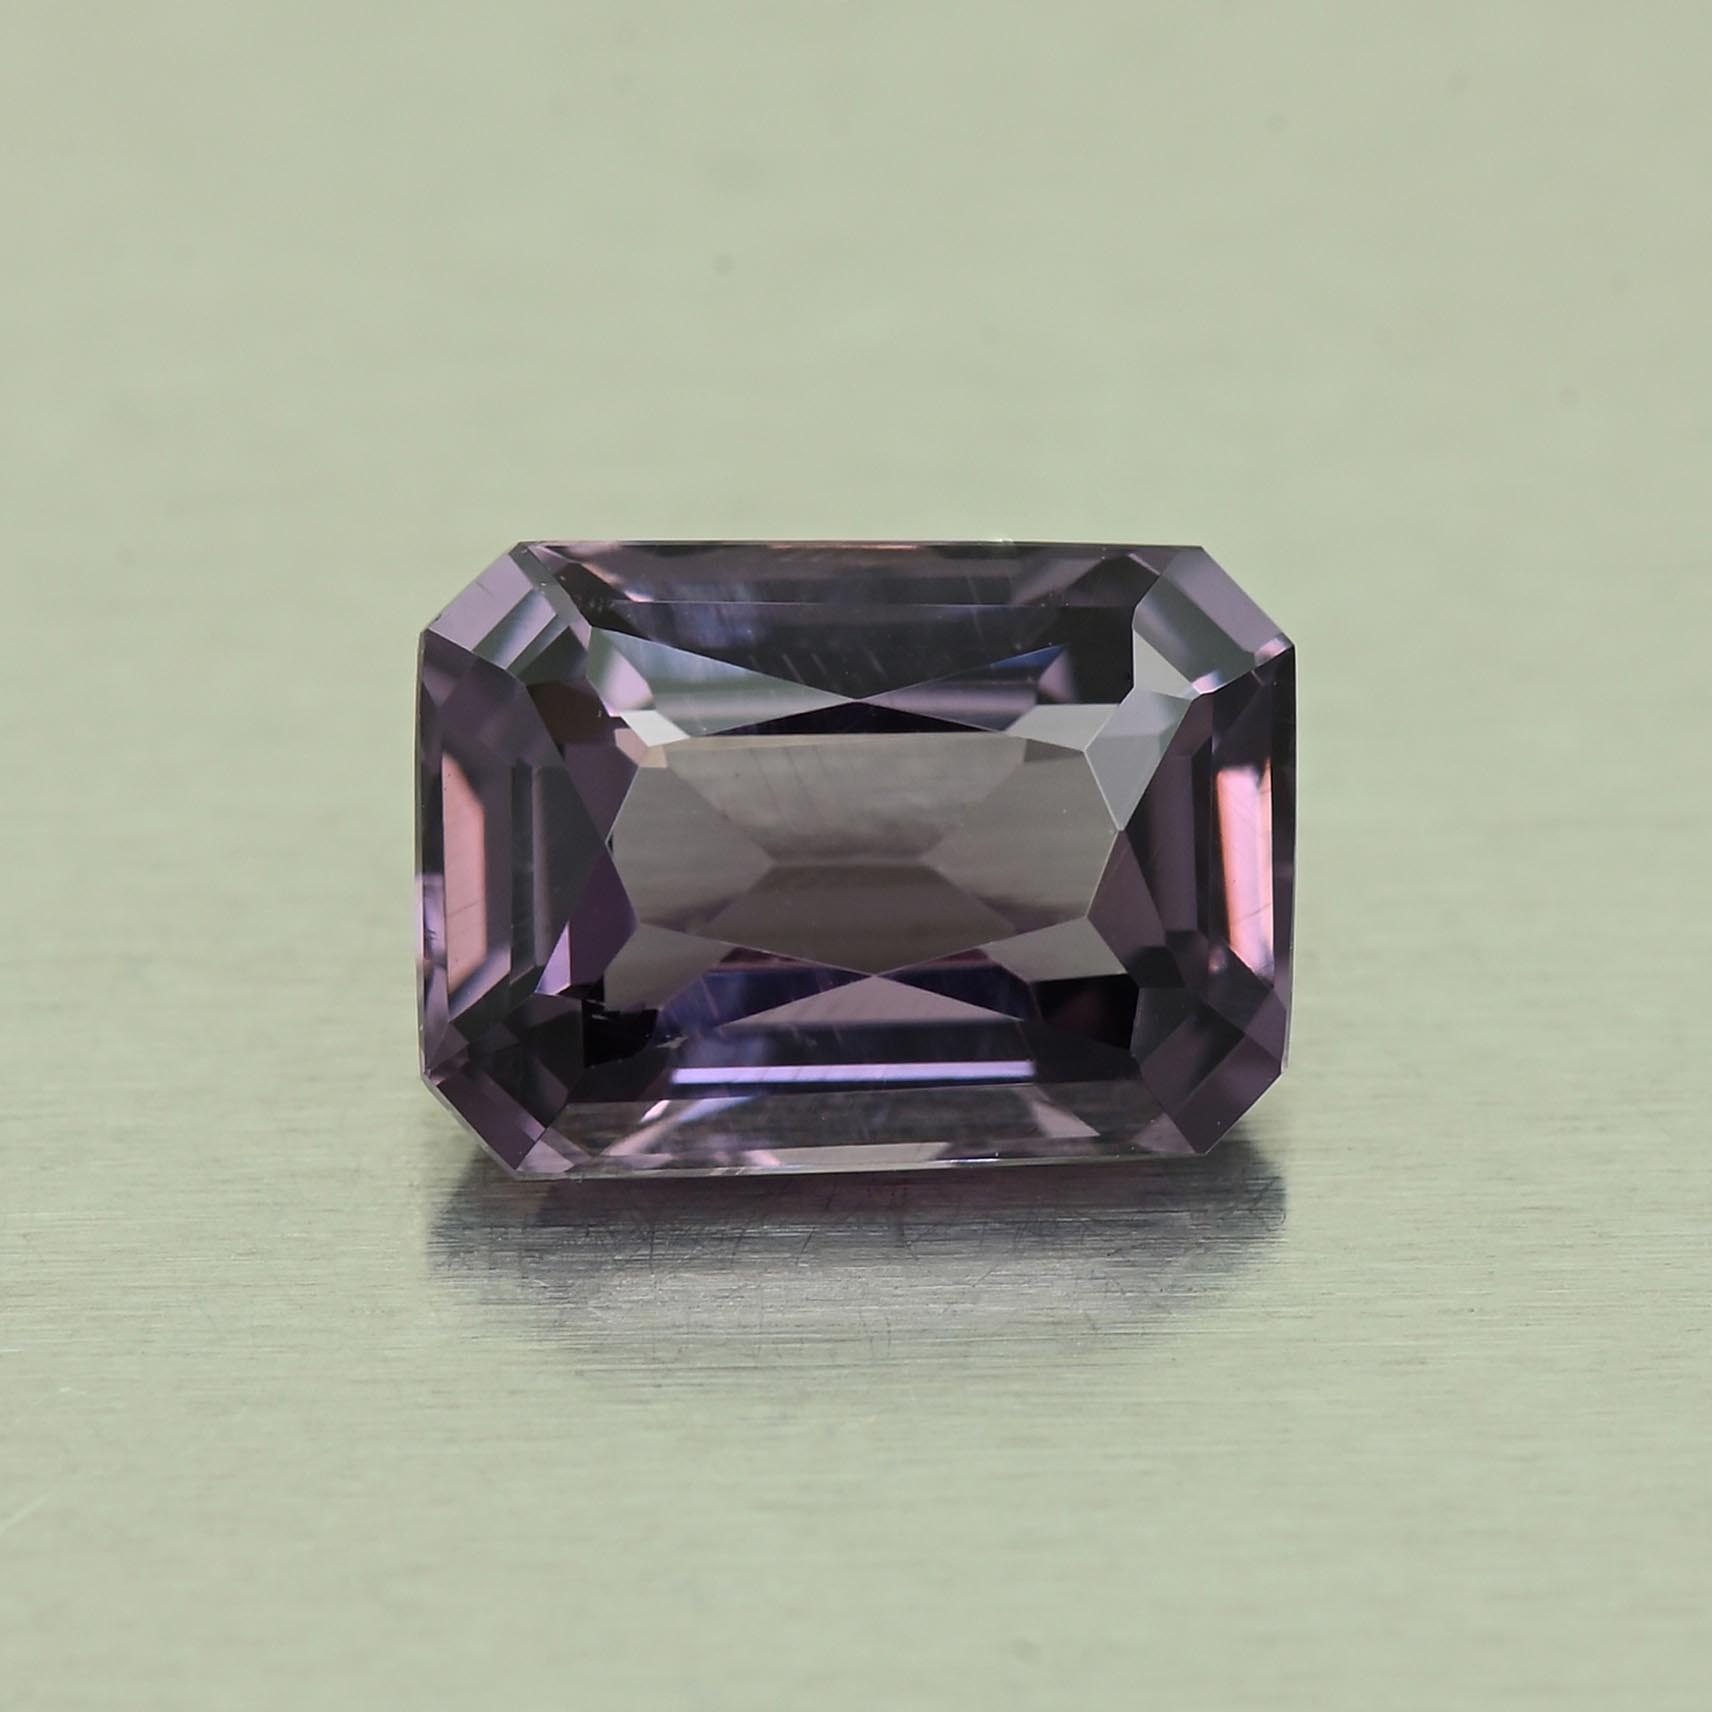 ColorChangeSpinel_rad_9.4x6.8mm_2.95cts_N_sp924_day